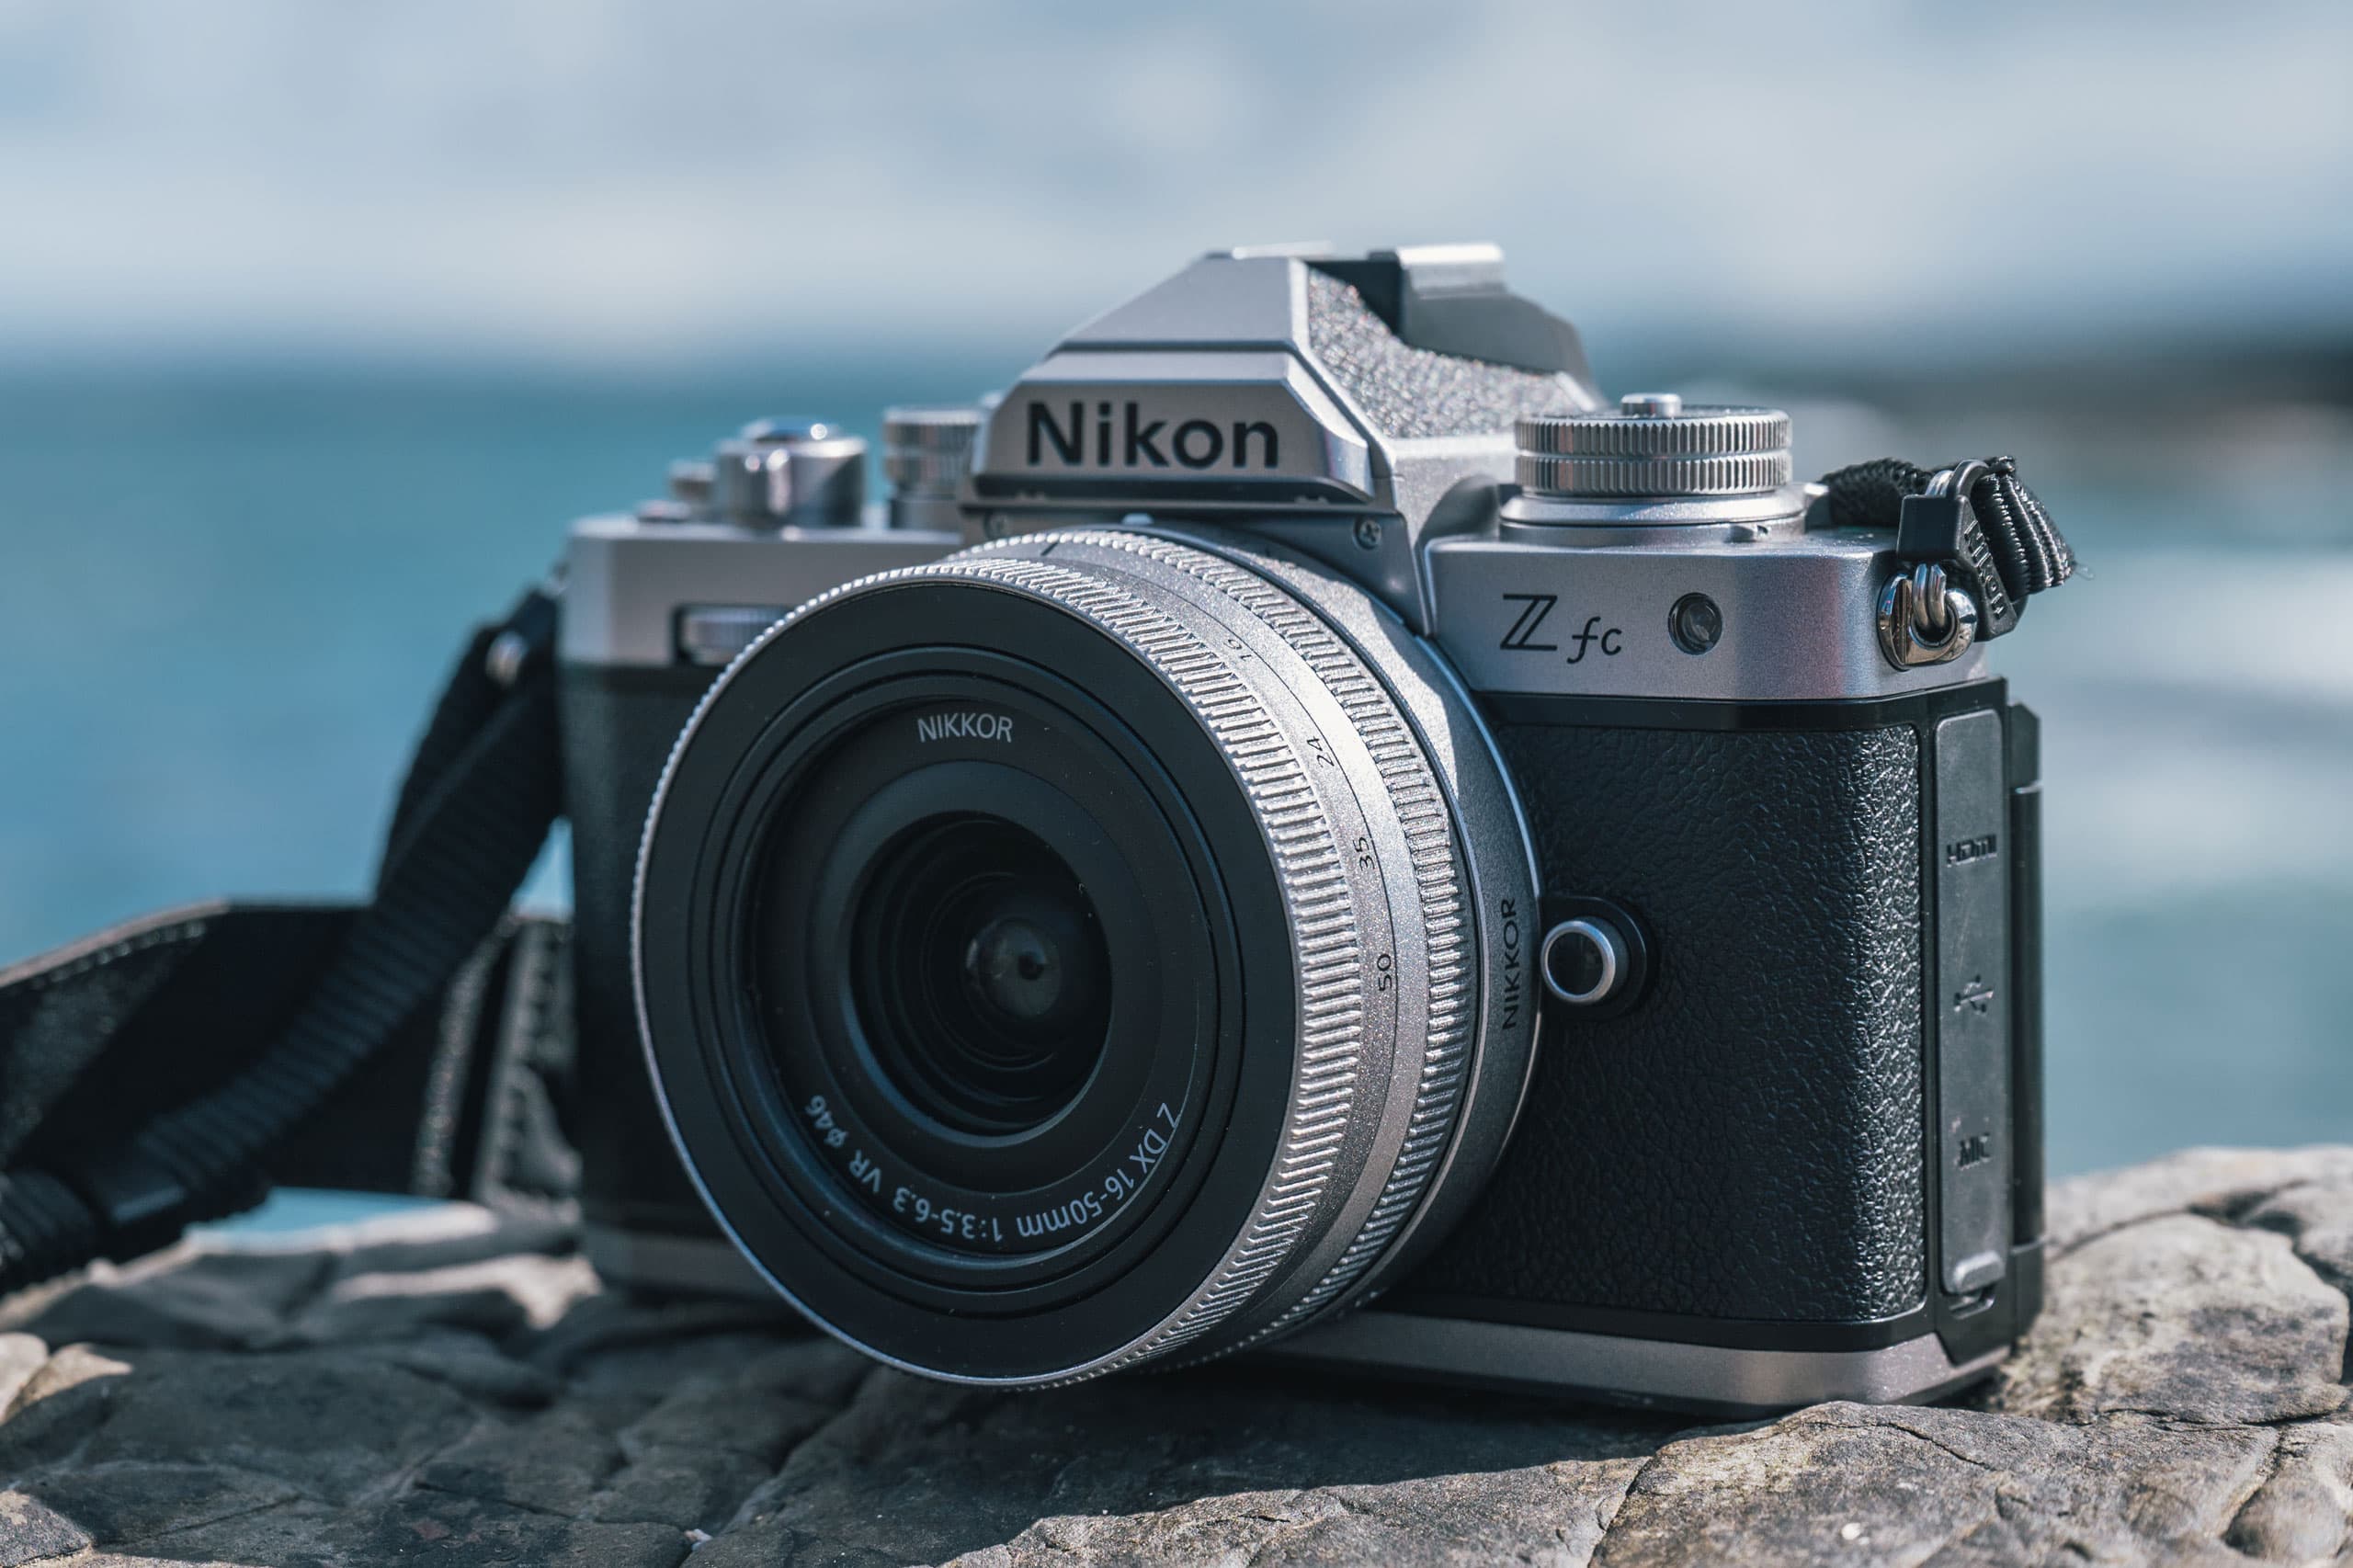  Nikon Z fc with Special Edition Prime Lens, Retro-inspired  compact mirrorless stills/video camera with matching 28mm f/2.8 prime lens